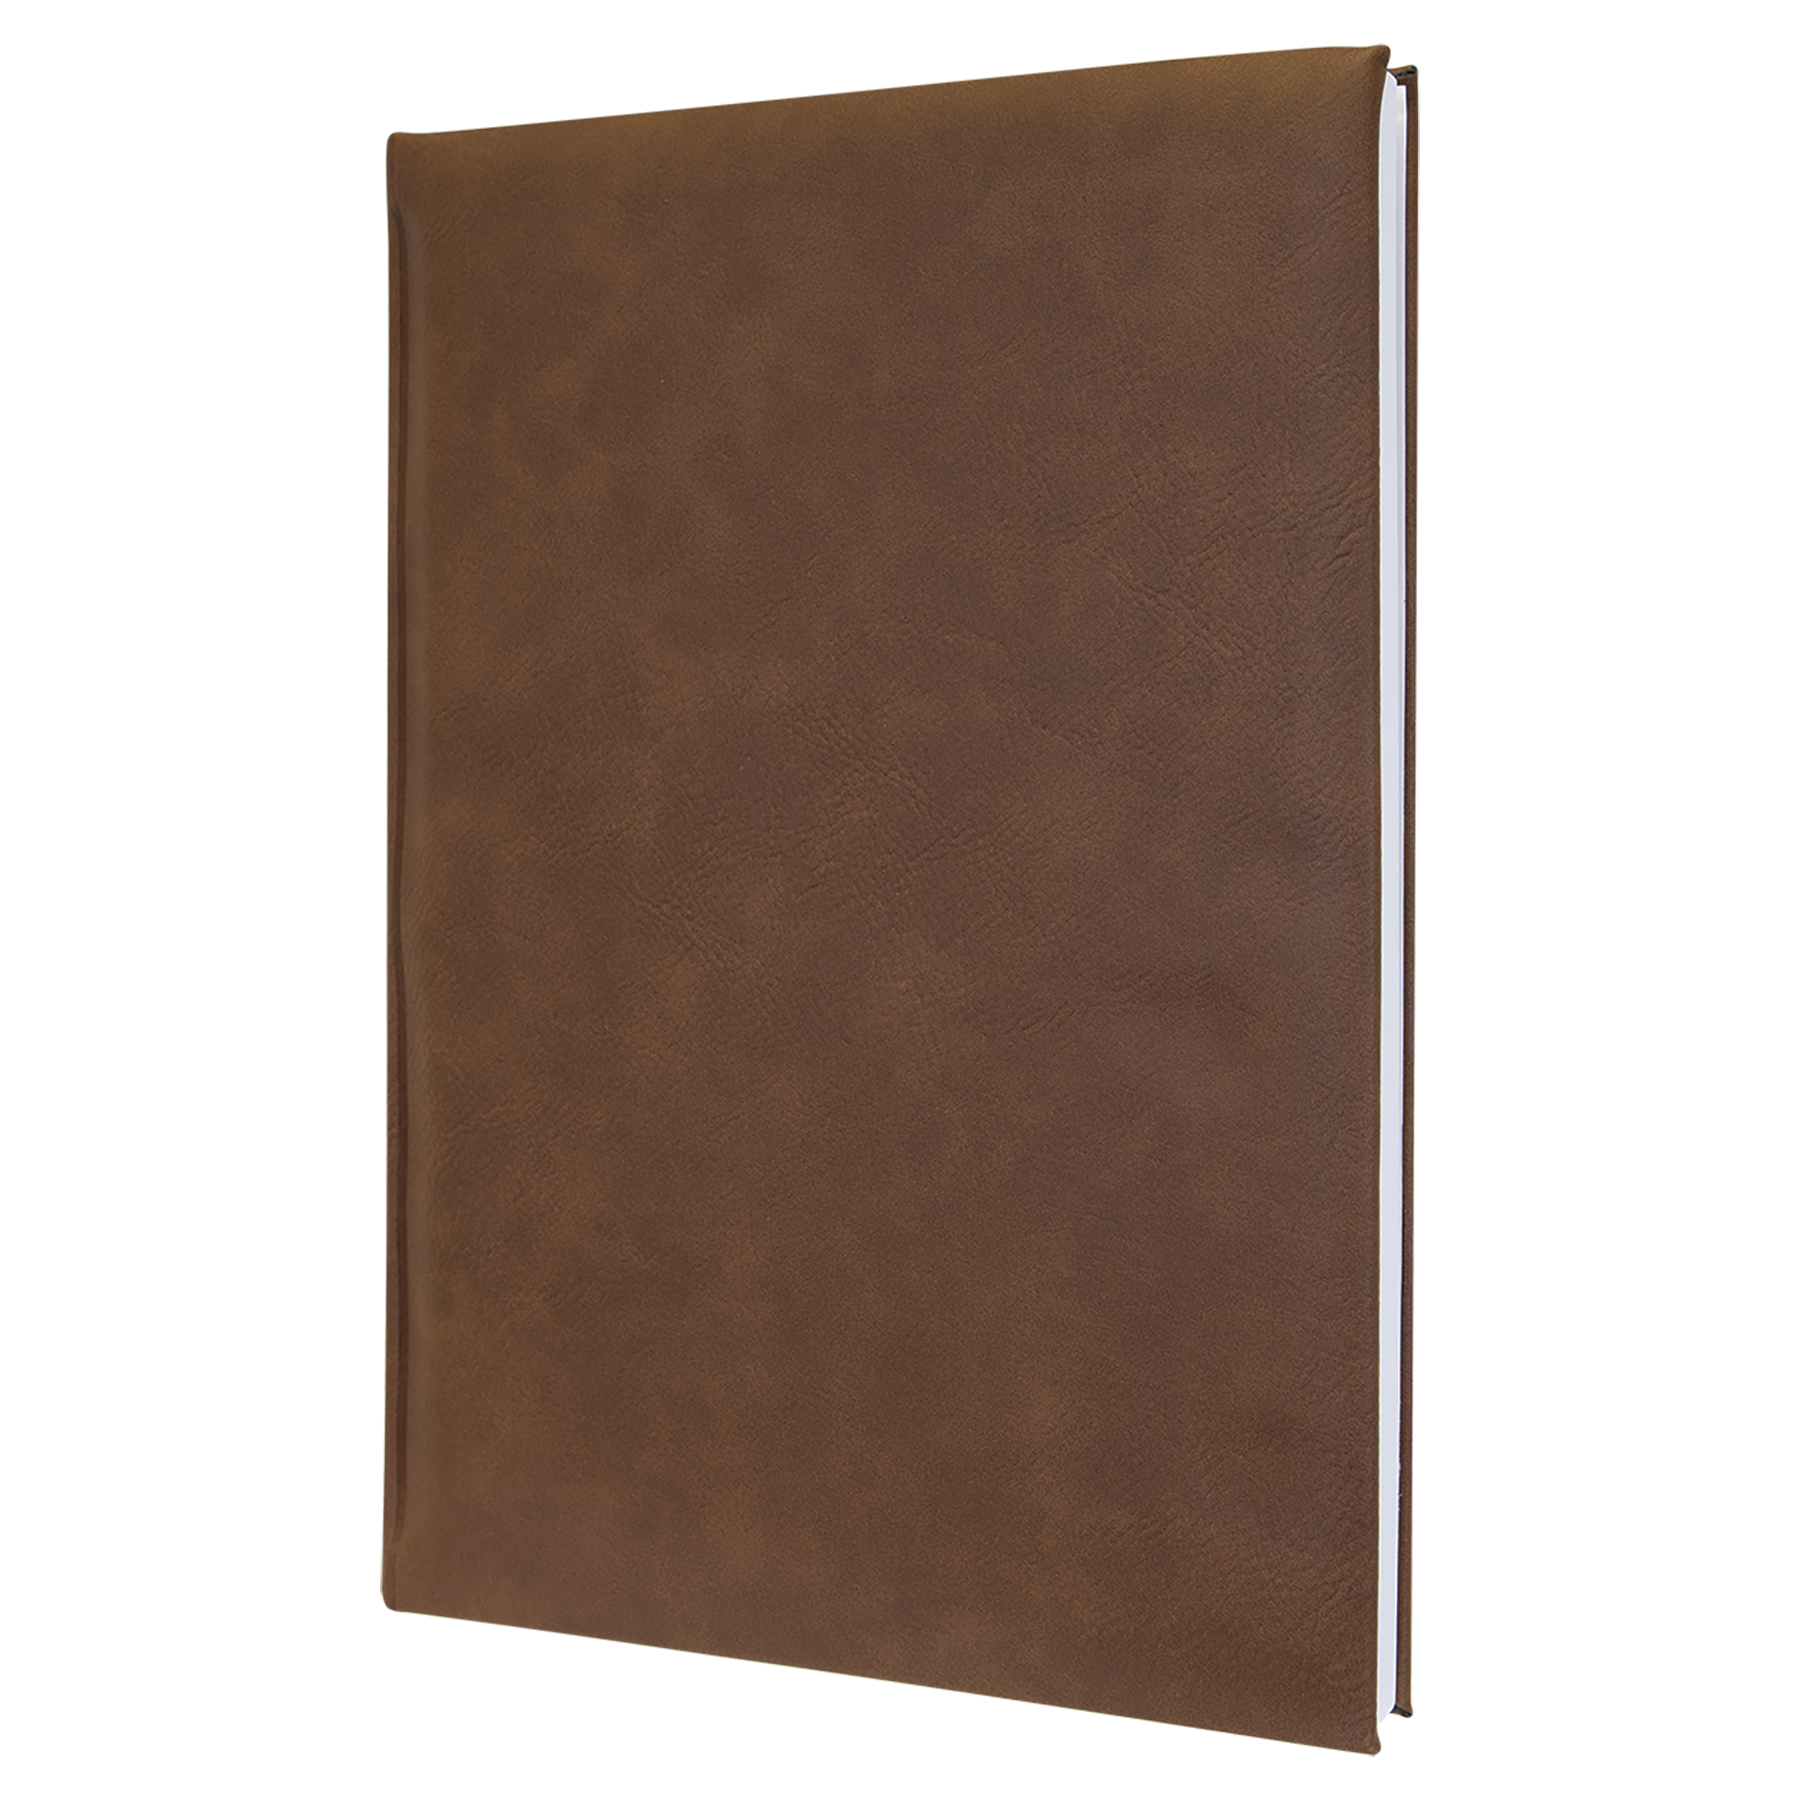 7" x 9 3/4" Dark Brown Laserable Leatherette Sketch Book with Unlined Notepad - Beacon Laser Creations LLC